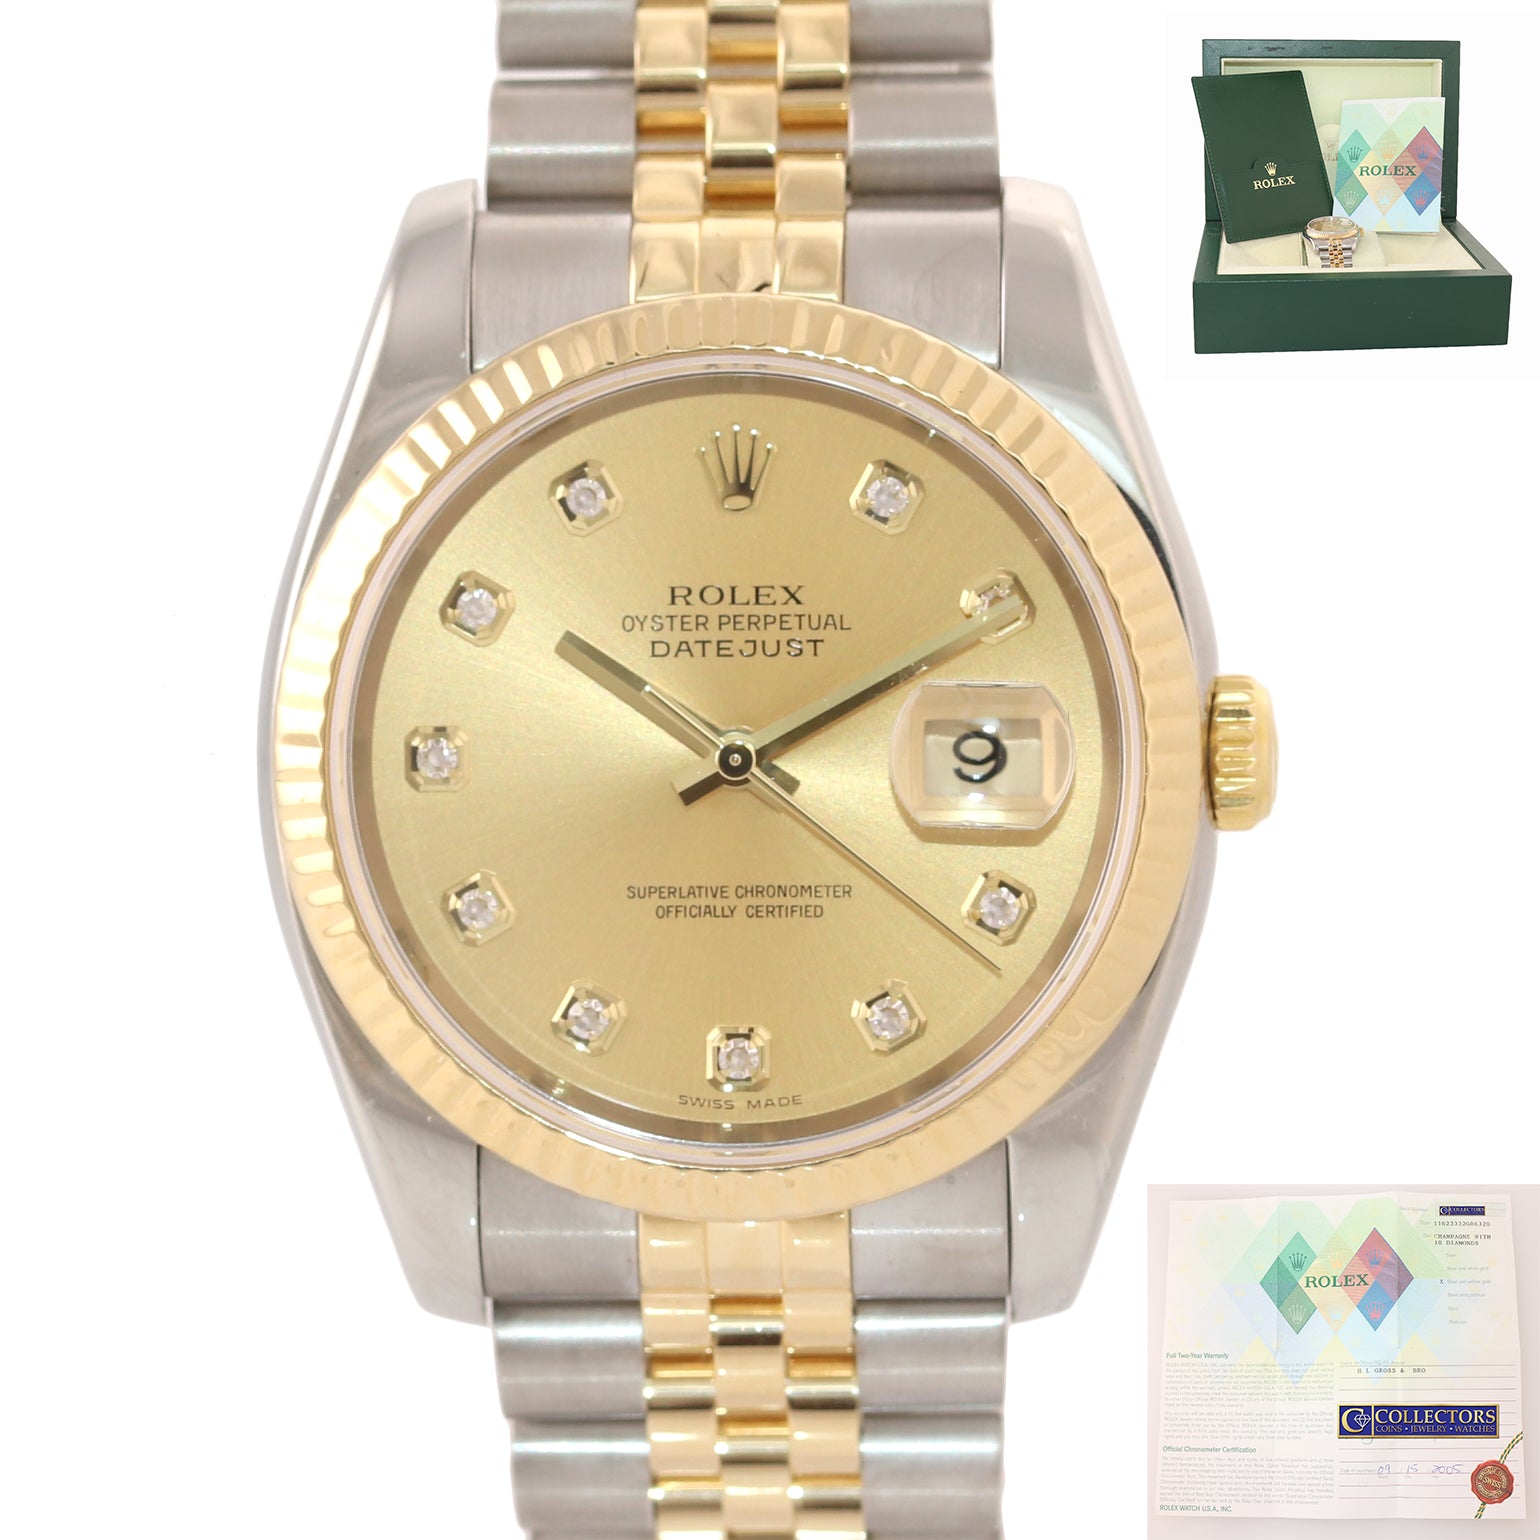 DIAMOND PAPERS Rolex DateJust Jubilee 36mm 116233 Champ 18k Gold Two Tone Watch